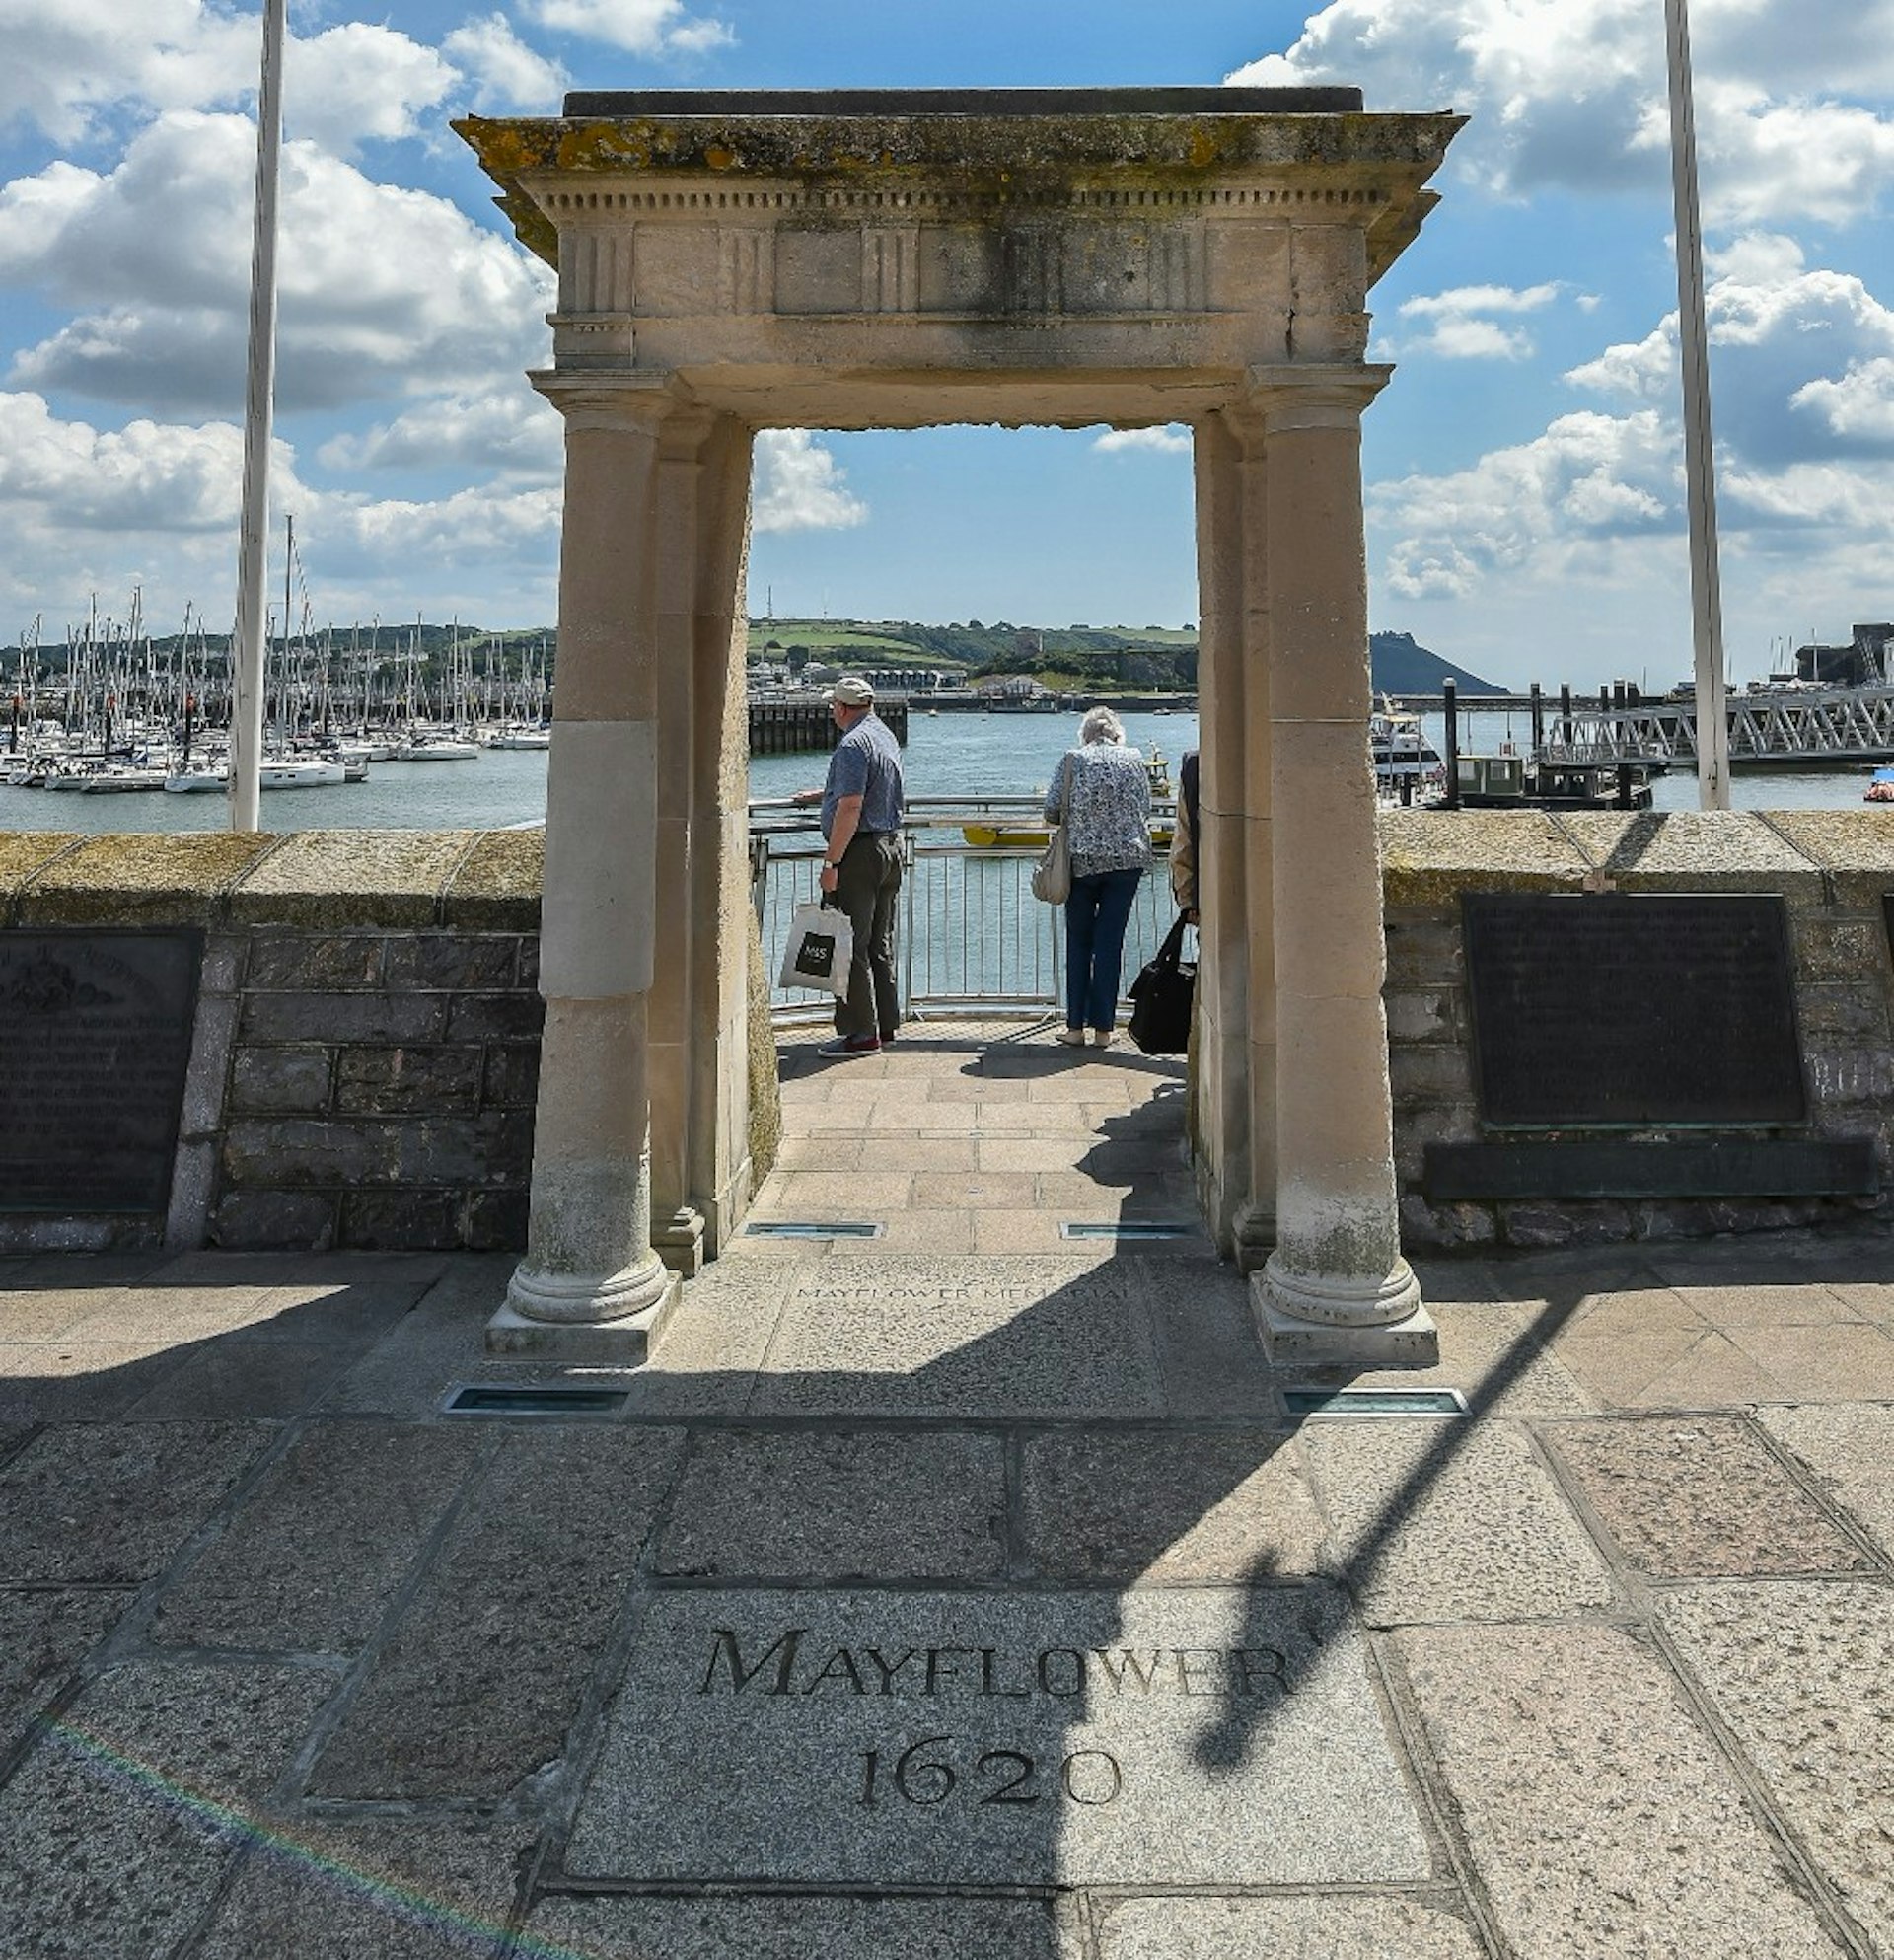 Two people look out over Plymouth harbour from the The Mayflower Steps on a sunny day.